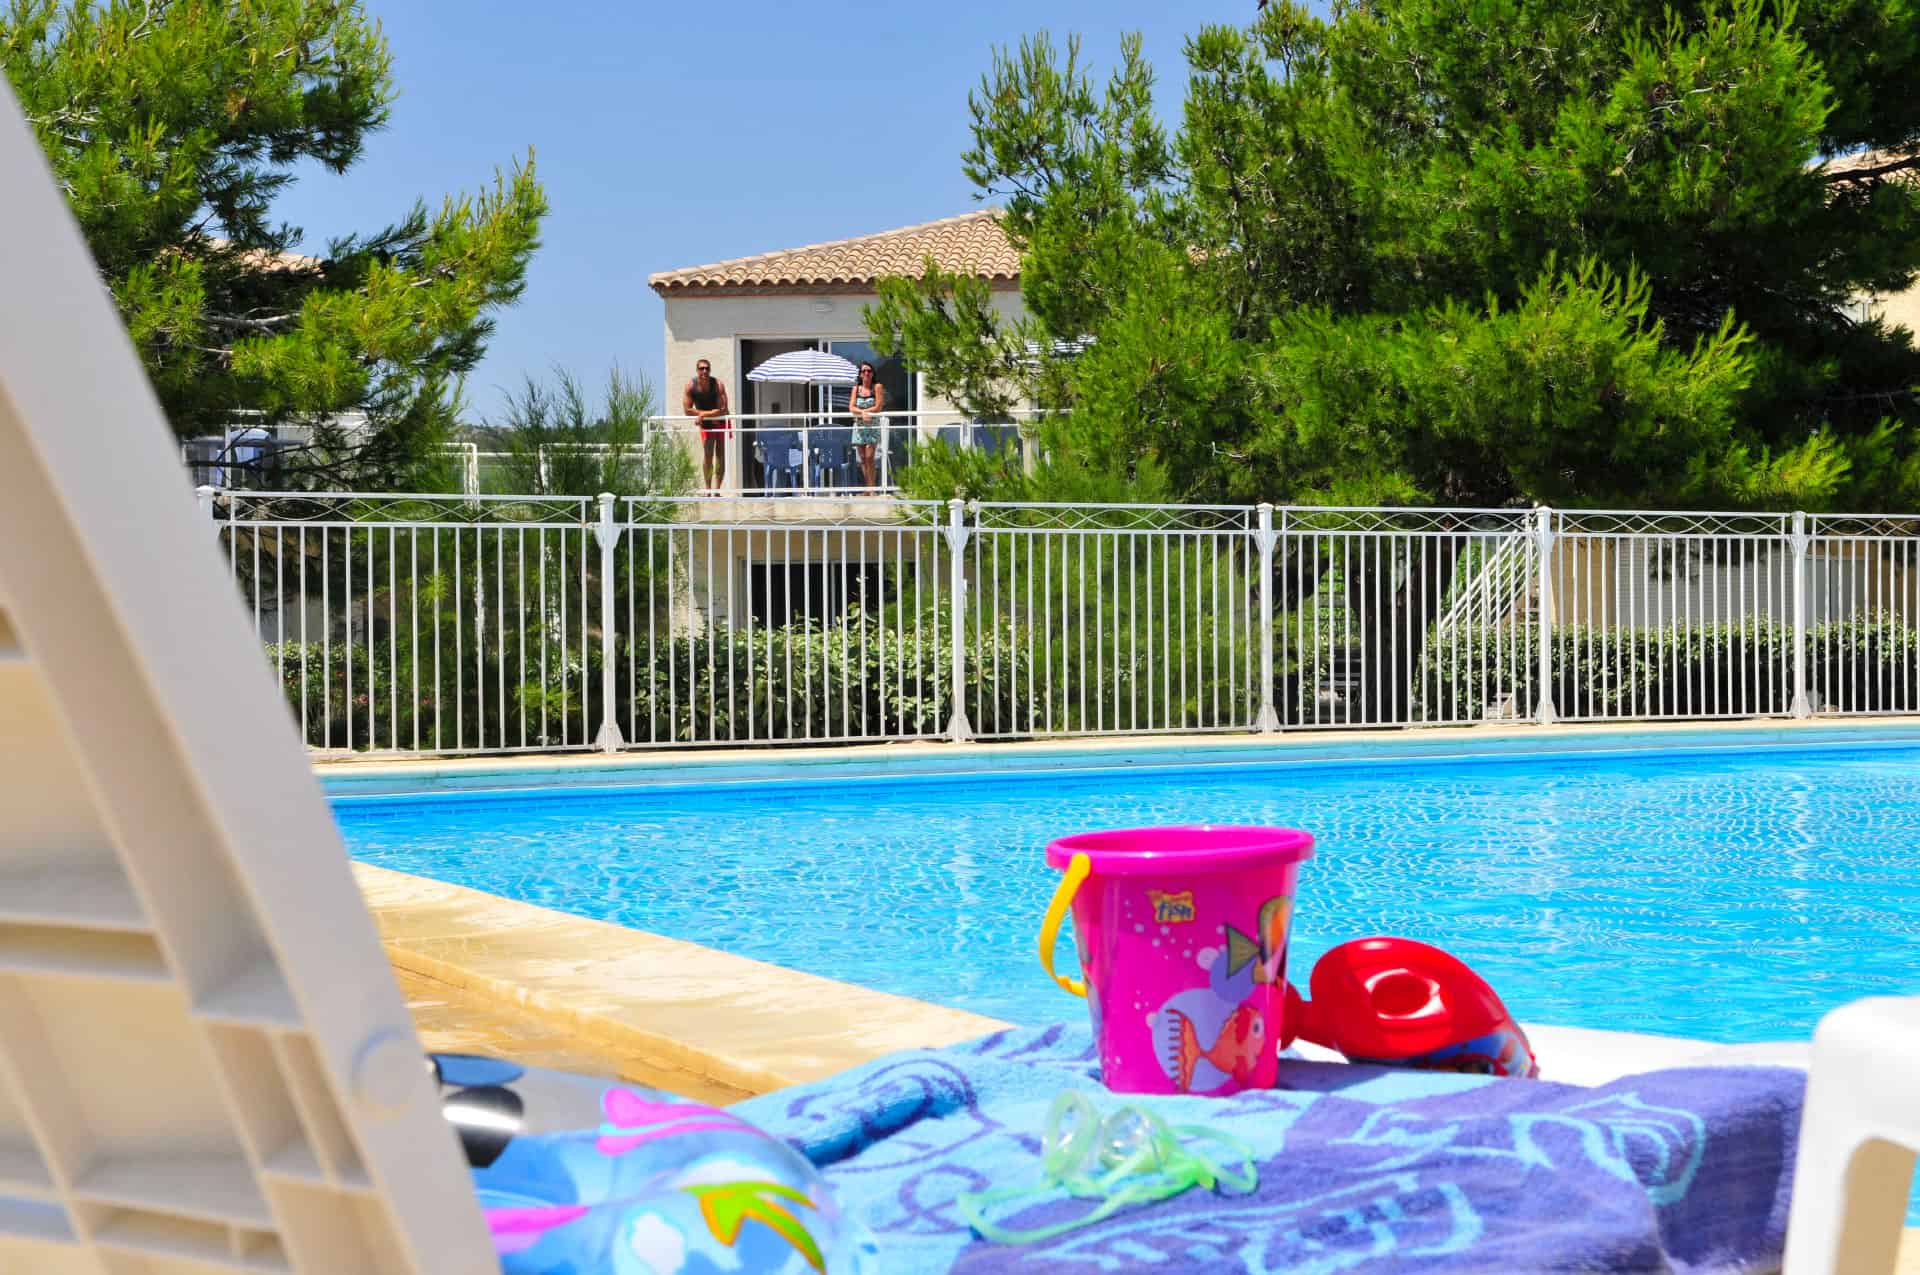 Outdoor swimming pool at Les Jardins de Phoebus holiday residence in Gruissan, Occitania